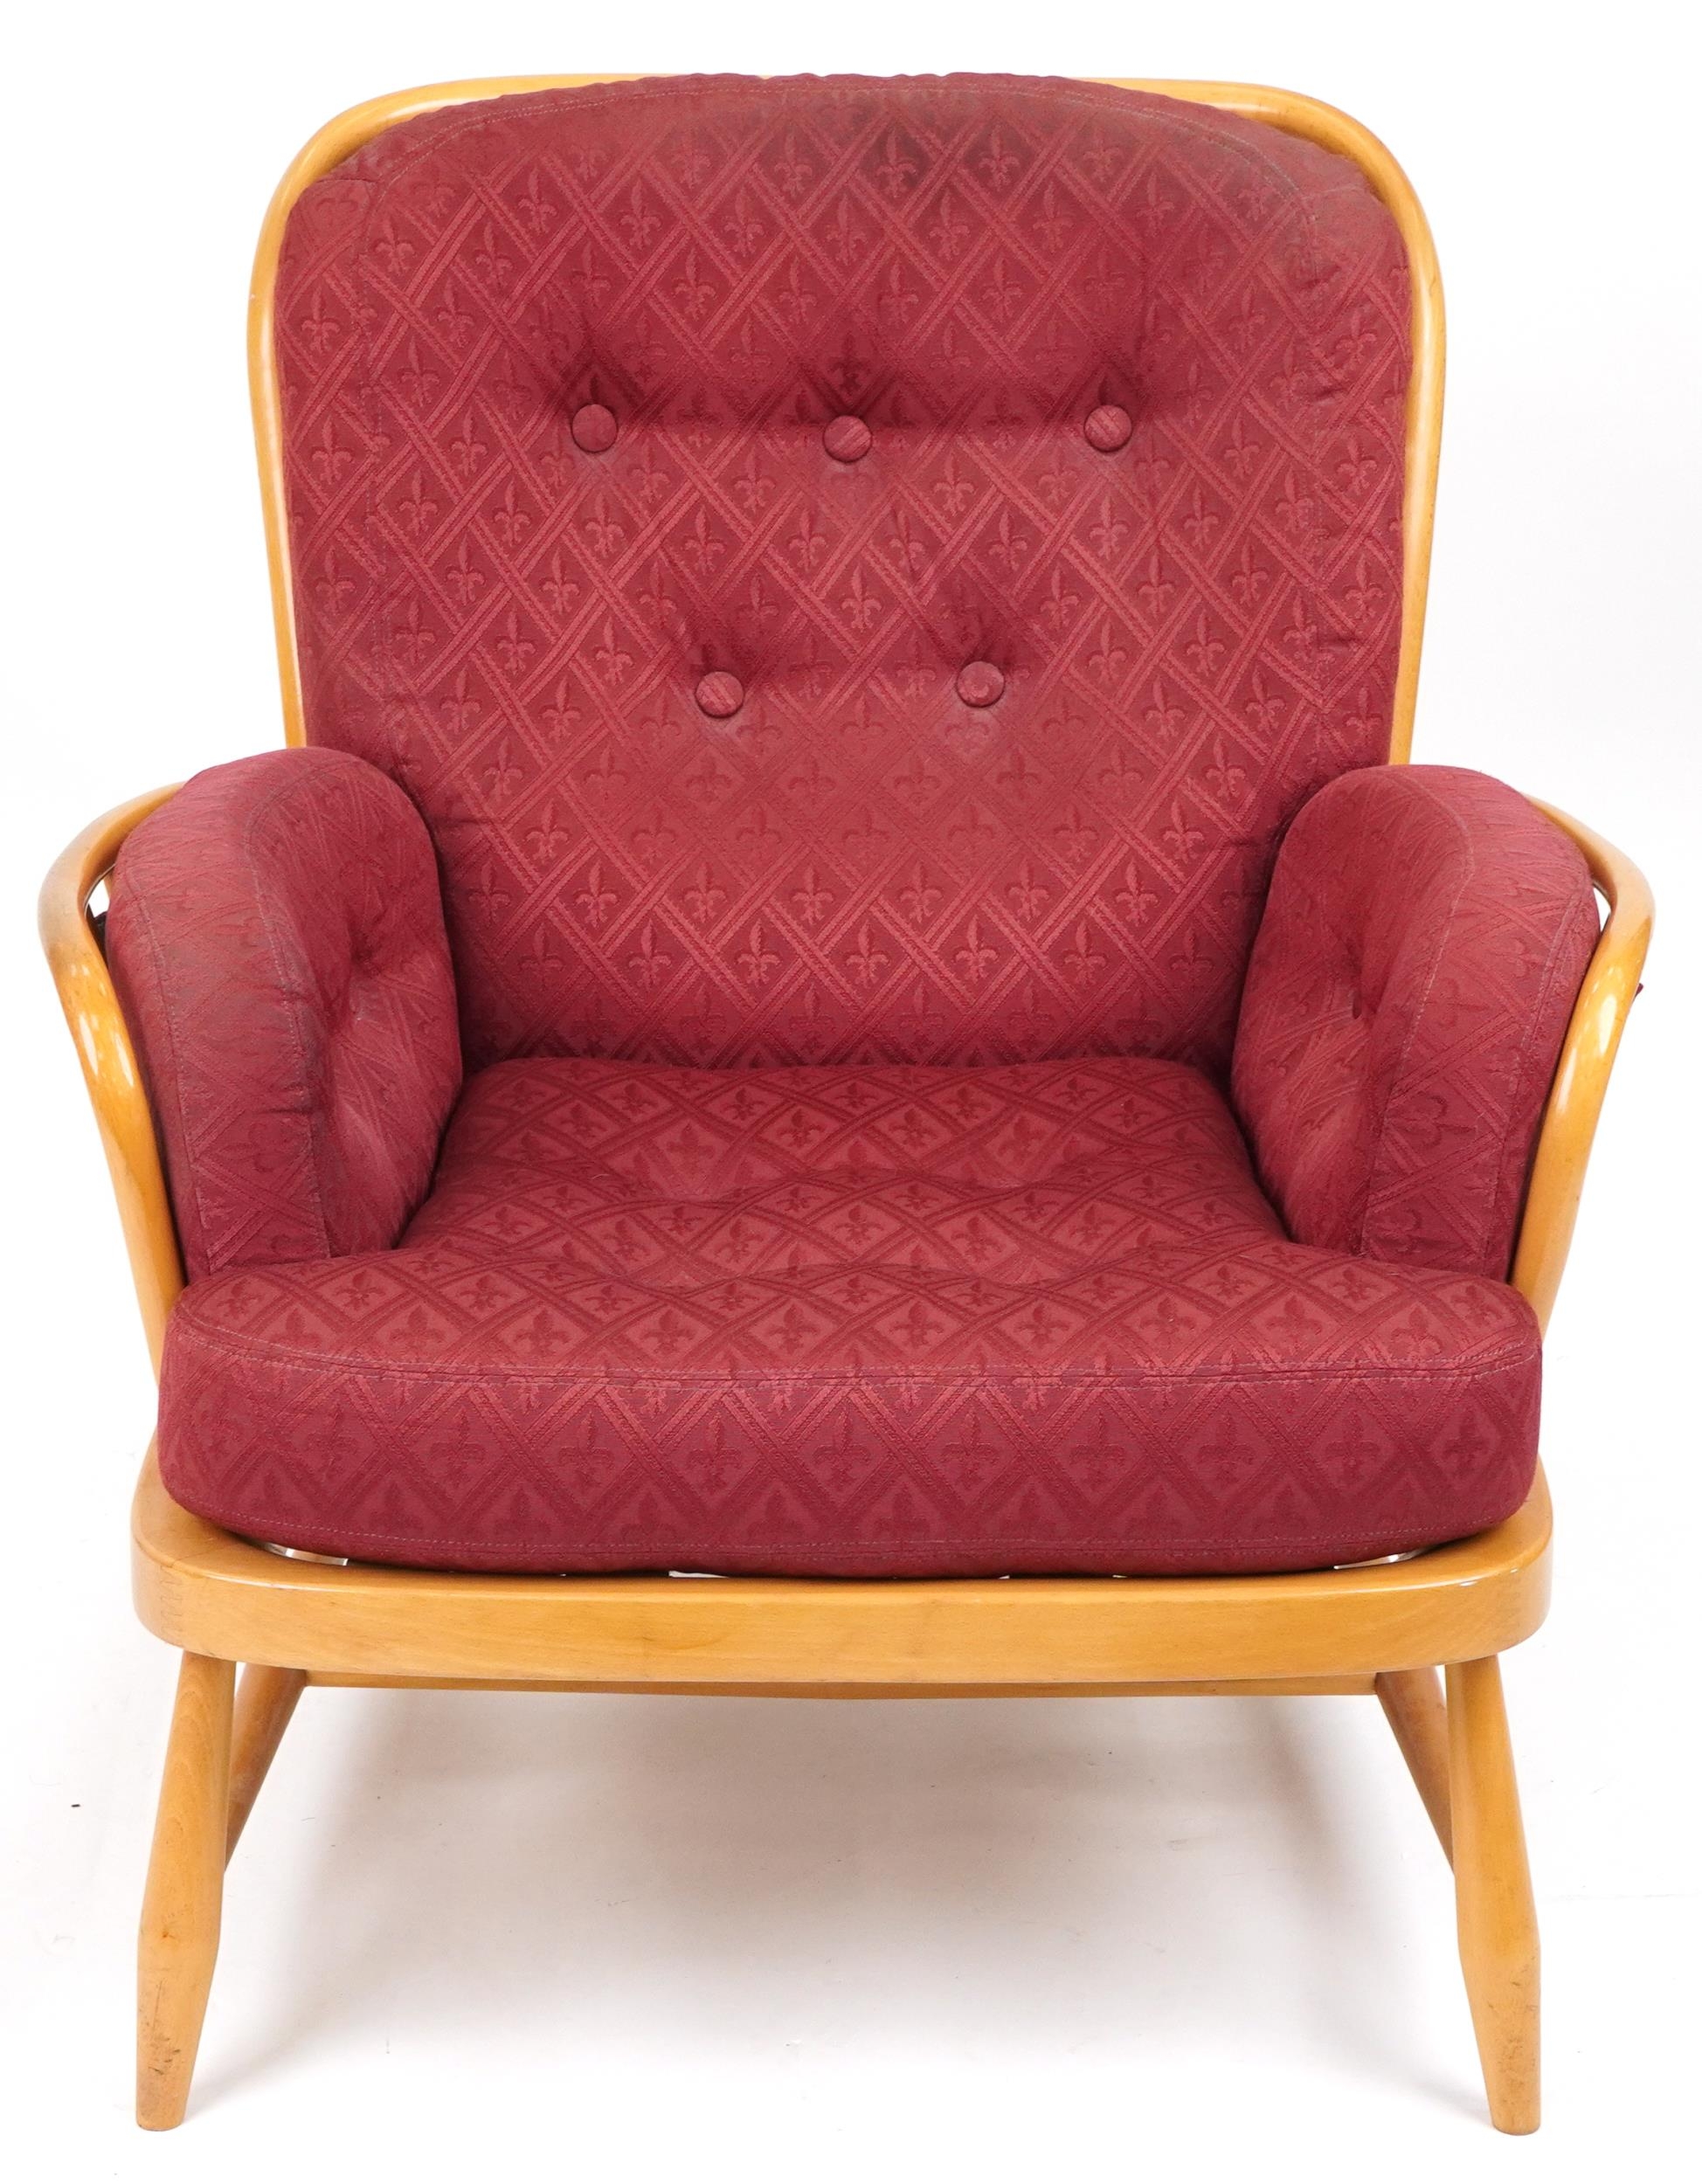 Ercol light elm Jubilee stick back armchair with red fleur de lis upholstered cushioned seats, - Image 2 of 6